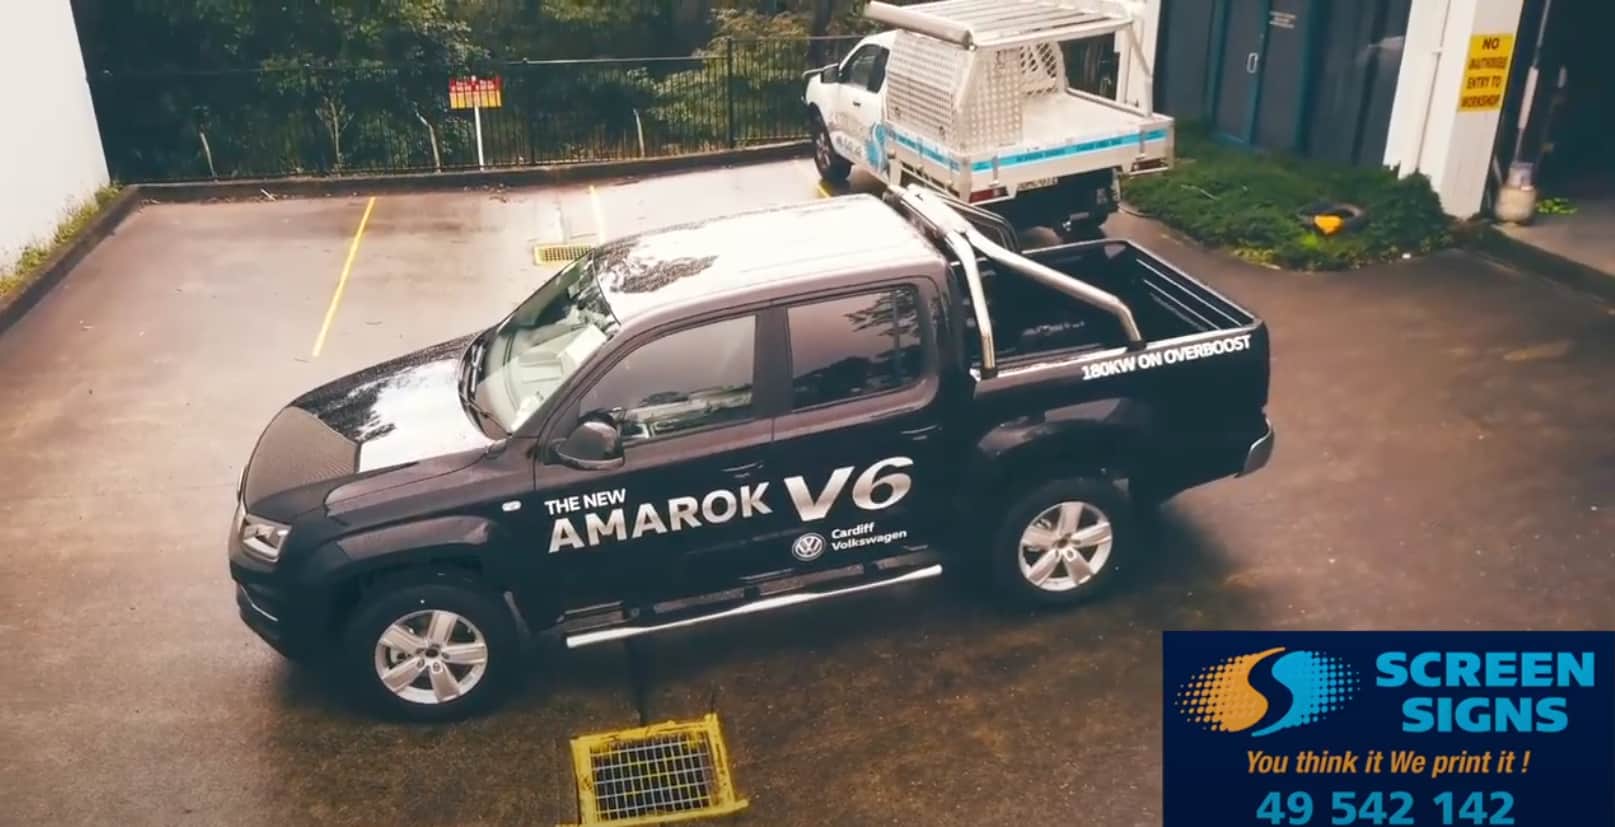 Amarok V6 getting ute tray signage in Cardiff NSW by Screen Signs